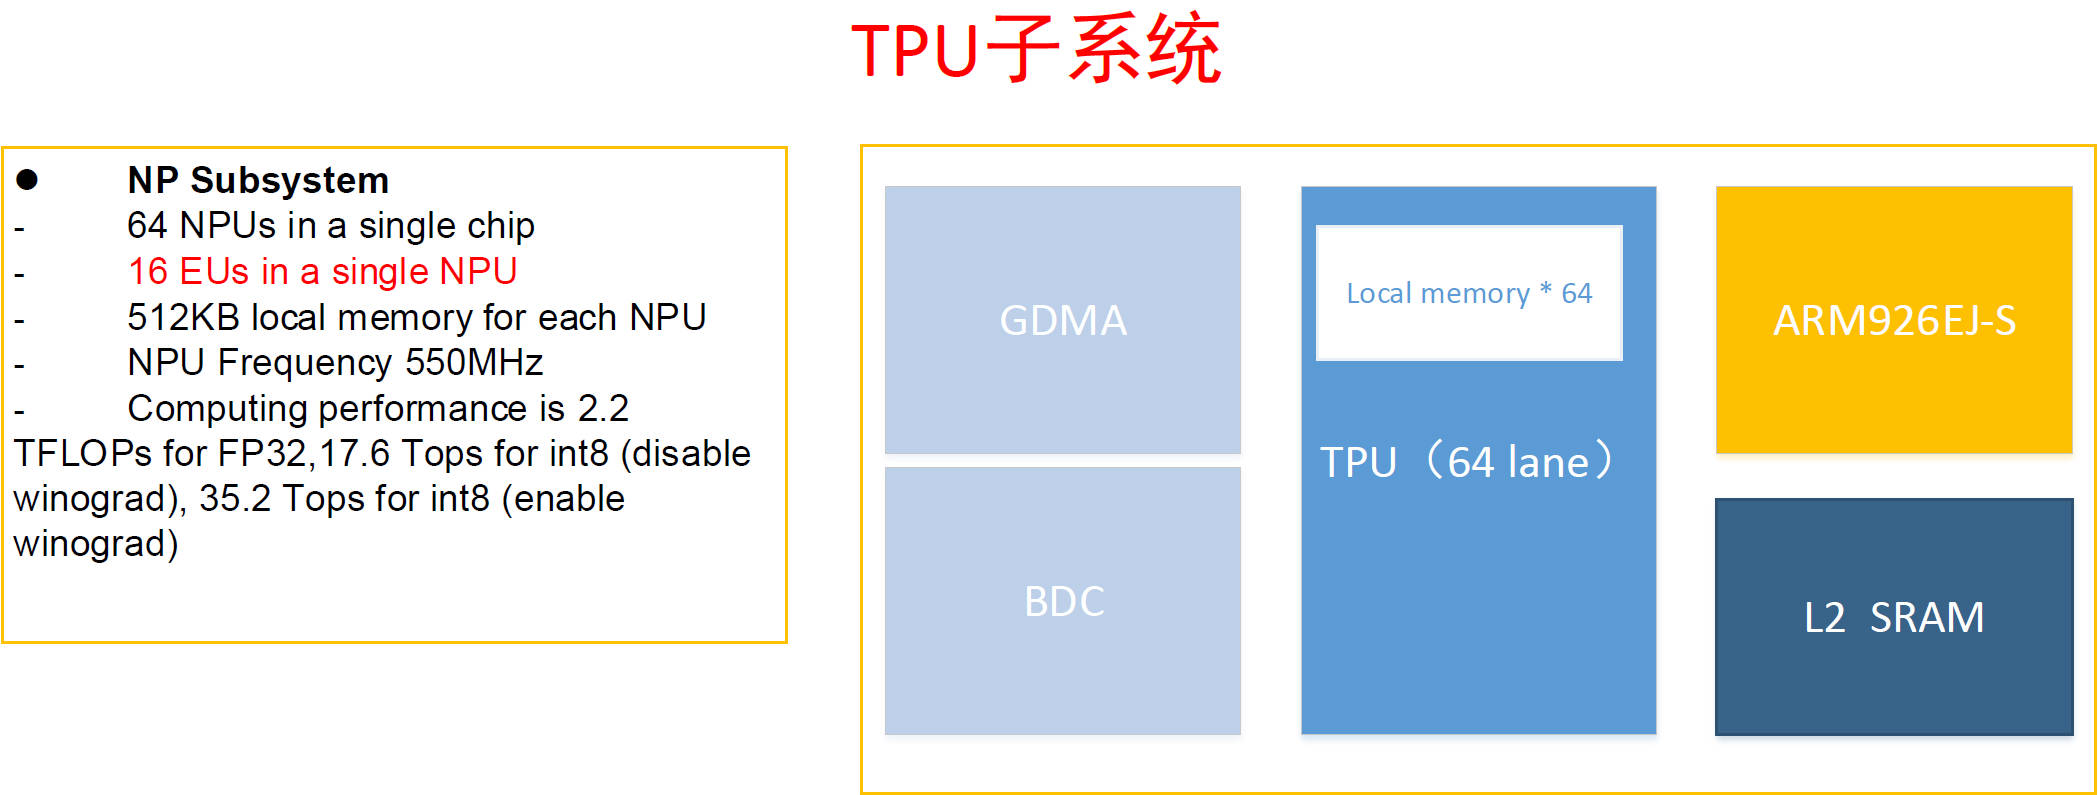 _images/basic_concepts_tpu_subsystem.jpg